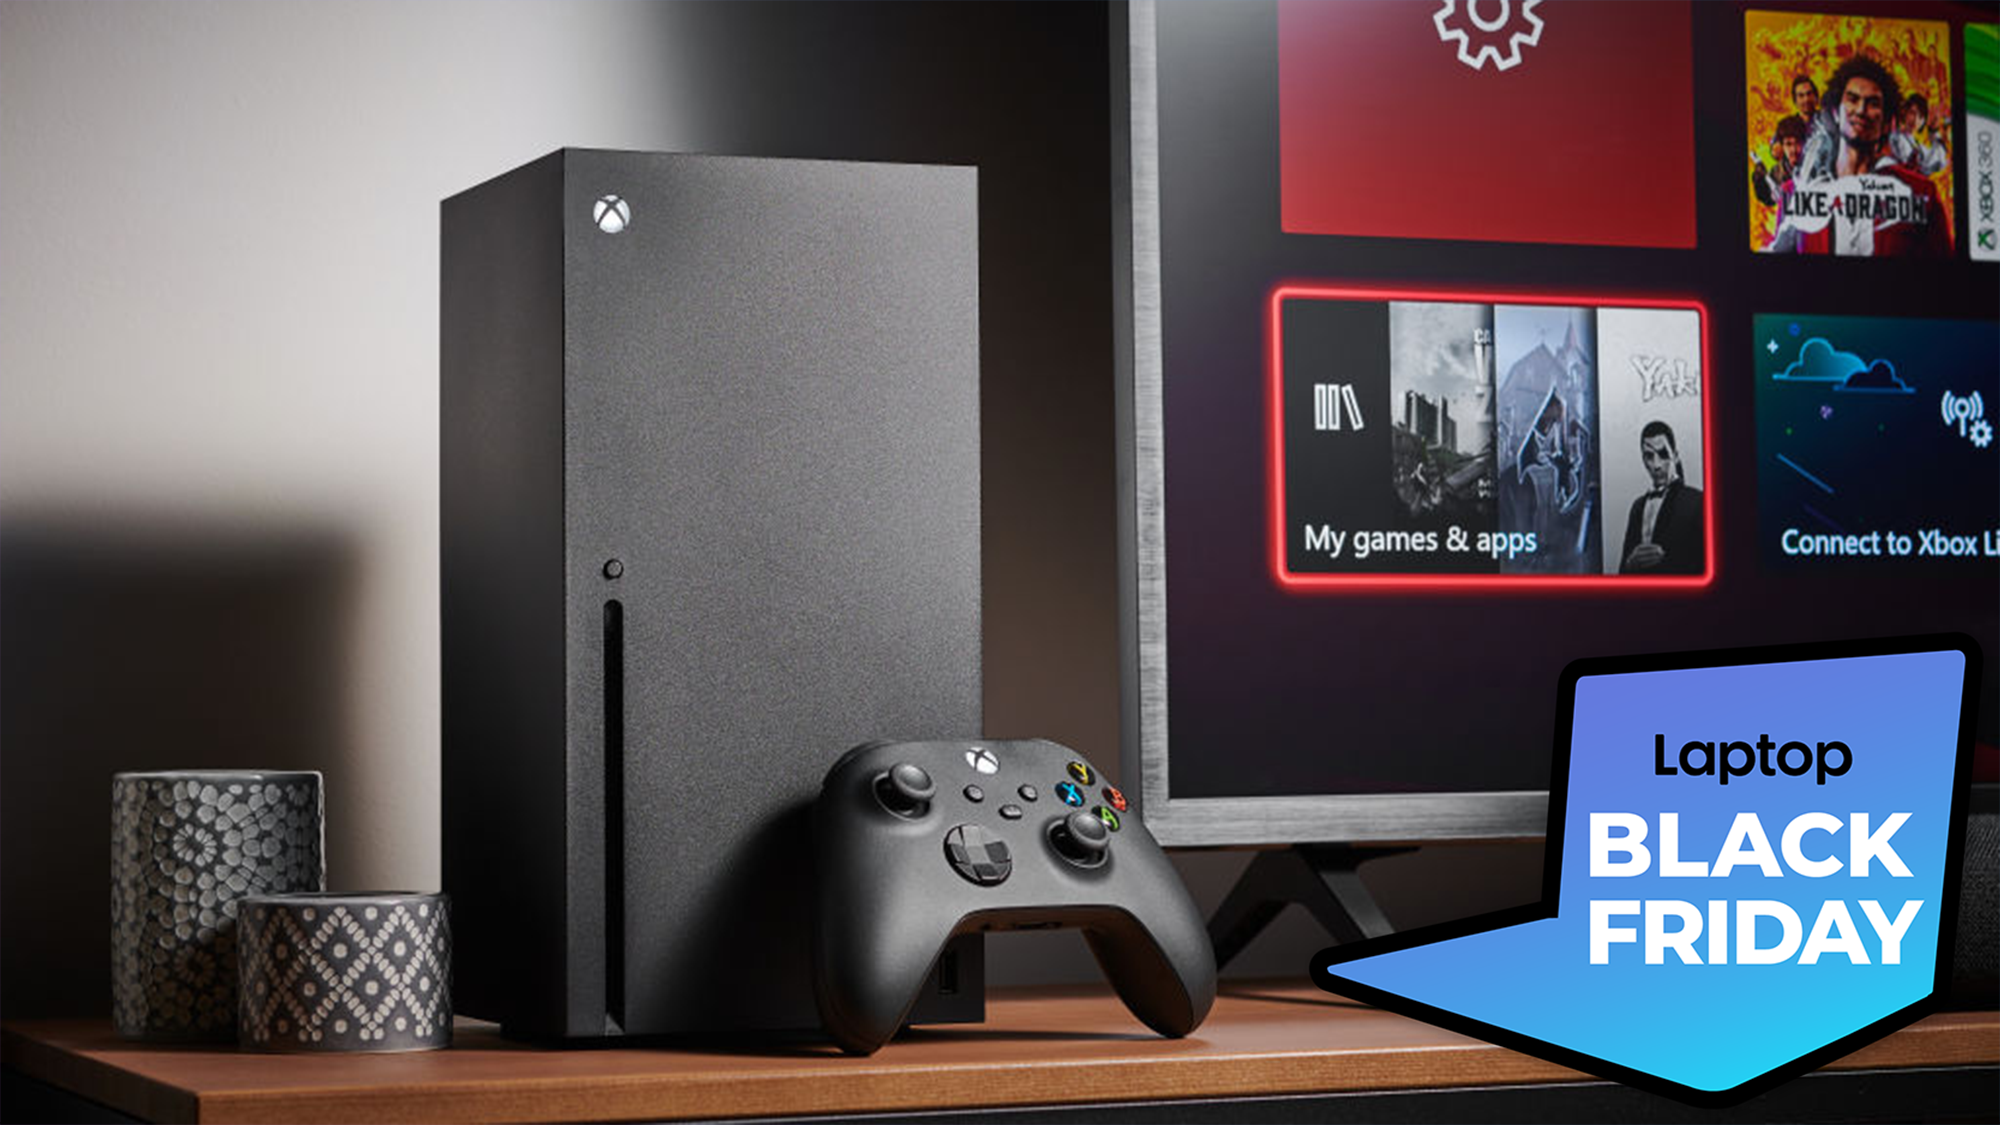 Xbox holiday deals start today at the Microsoft Store